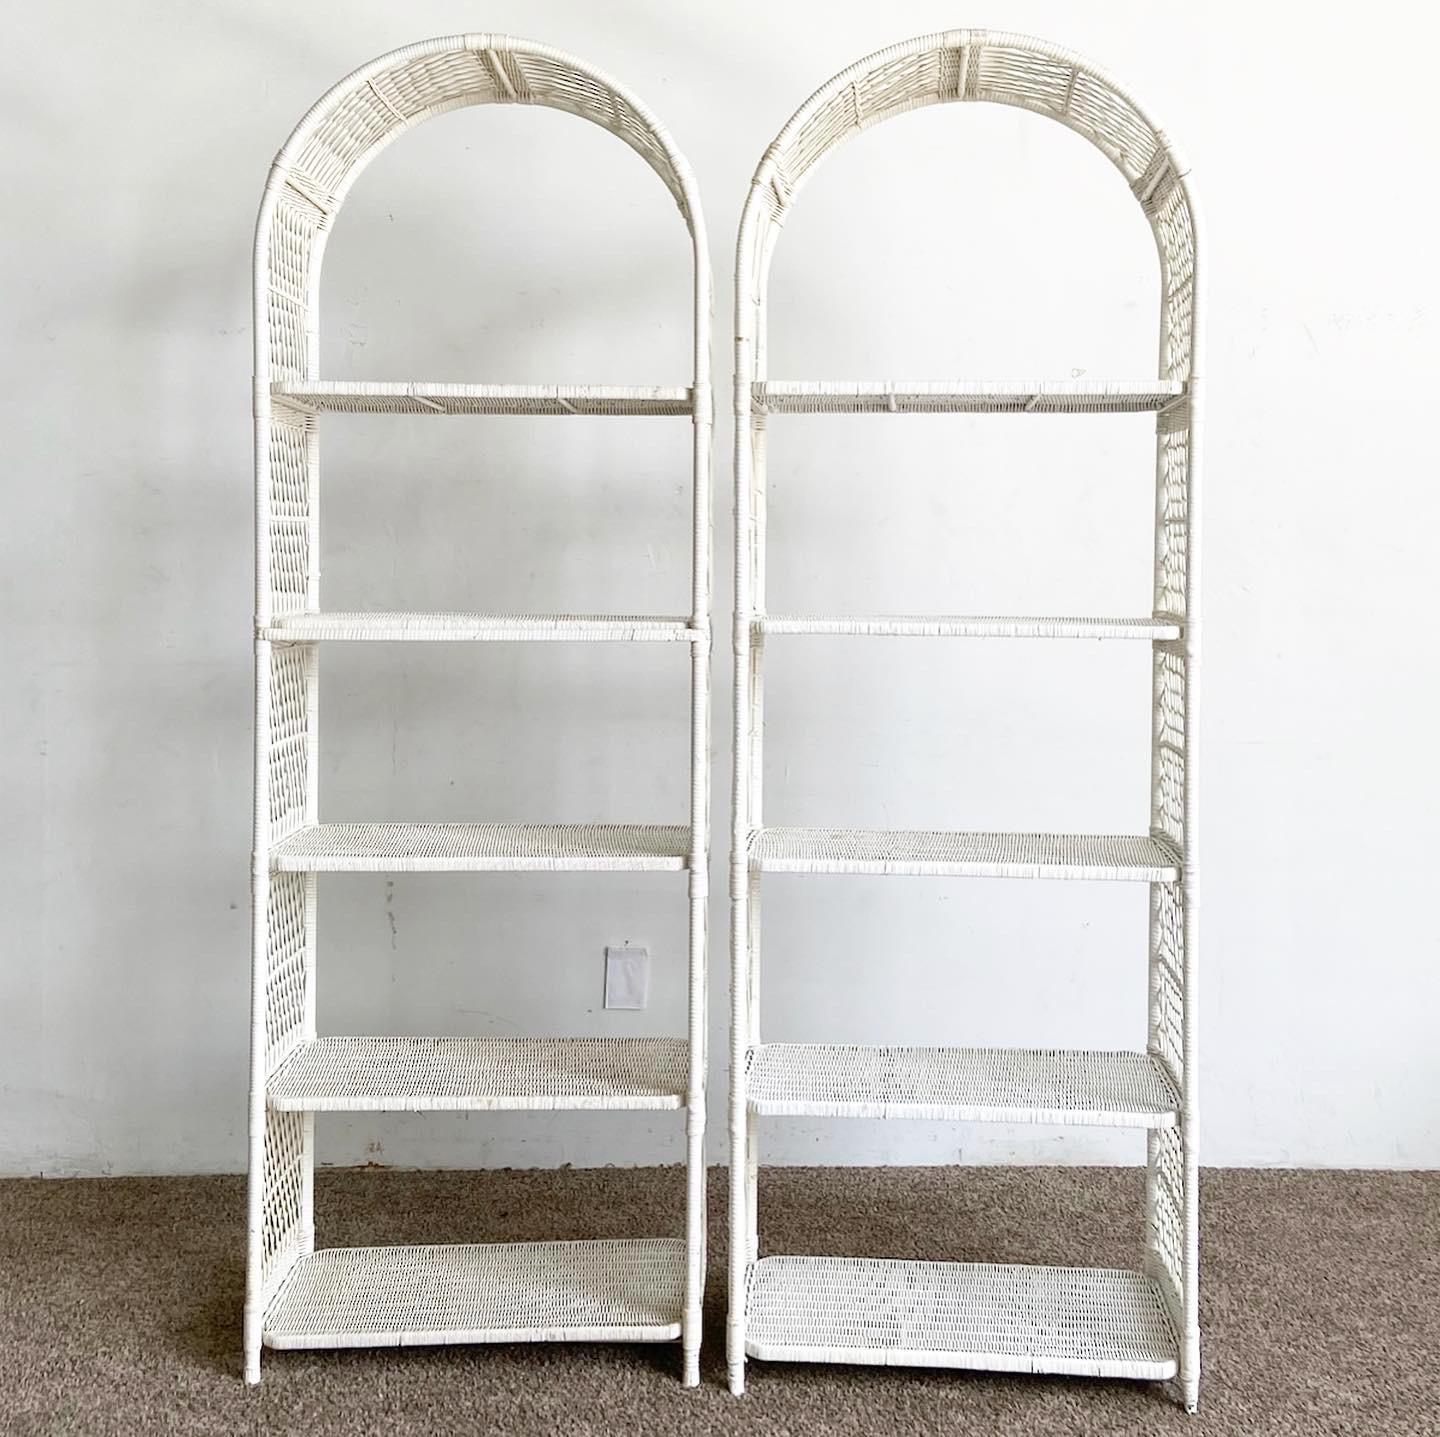 Late 20th Century Boho Chic Arch Top White Wicker Rattan Étagères - a Pair For Sale